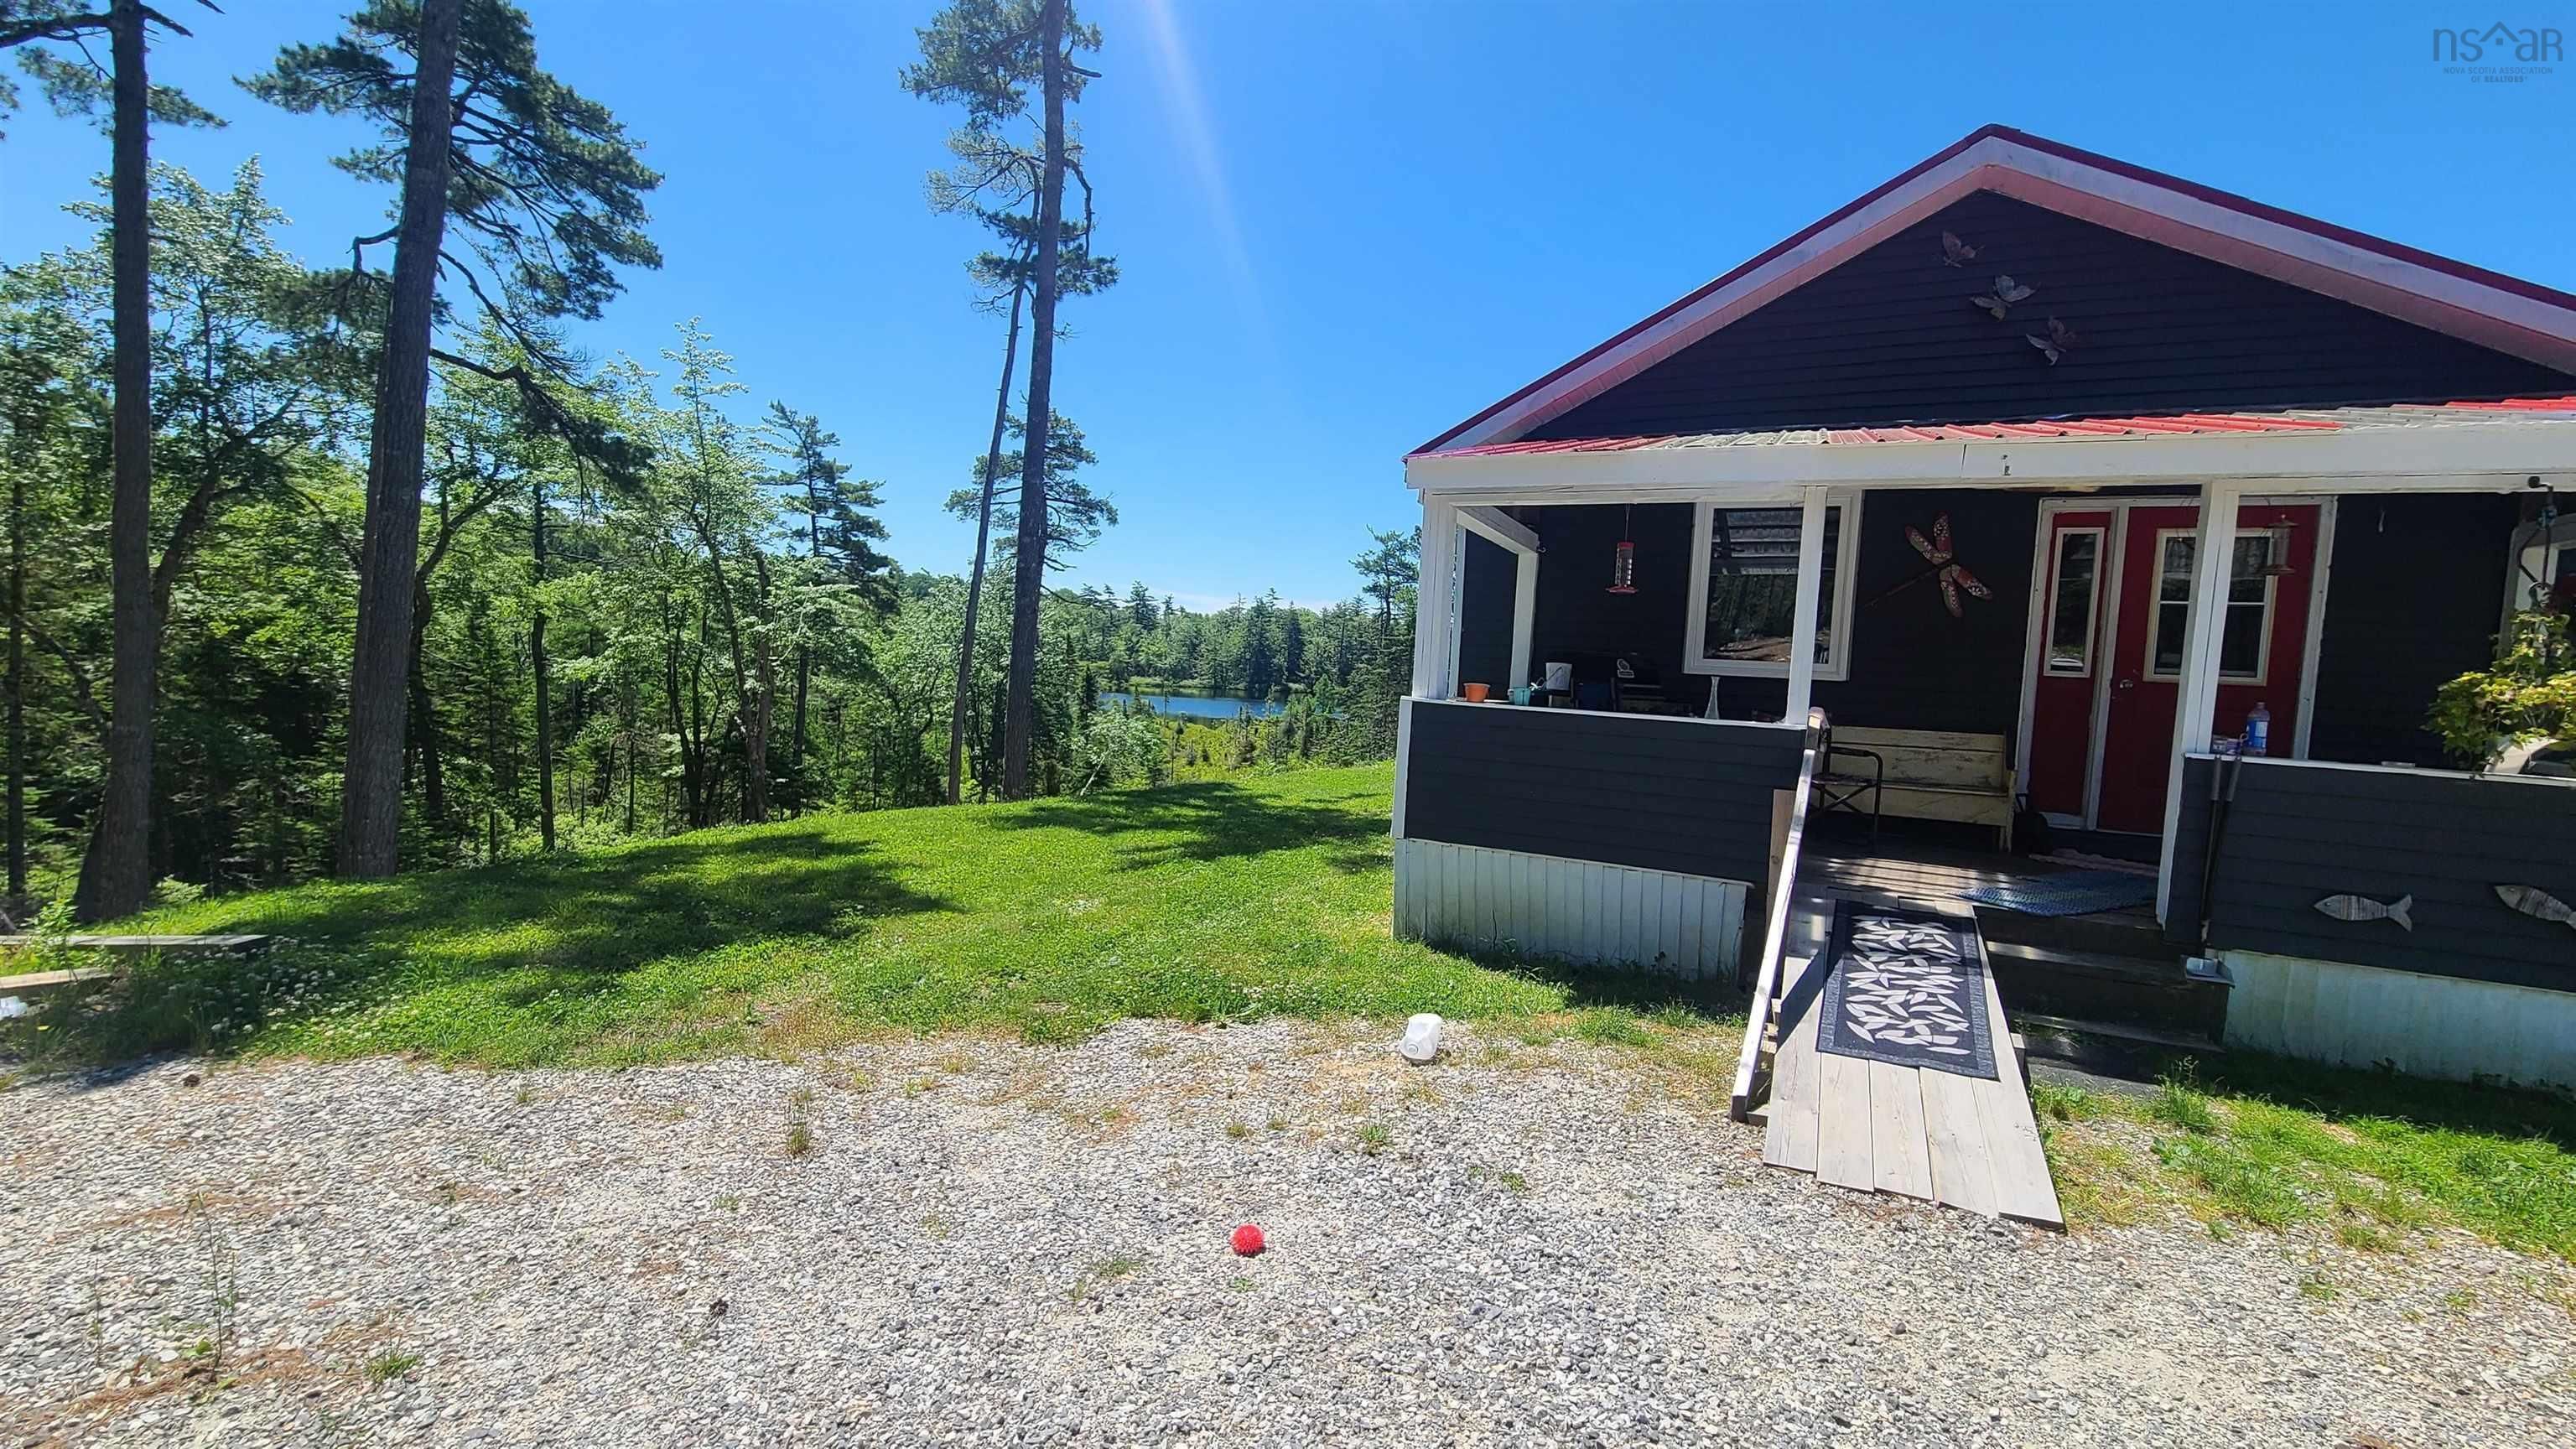 Main Photo: 274 Peters Drive in Upper Ohio: 407-Shelburne County Residential for sale (South Shore)  : MLS®# 202214990